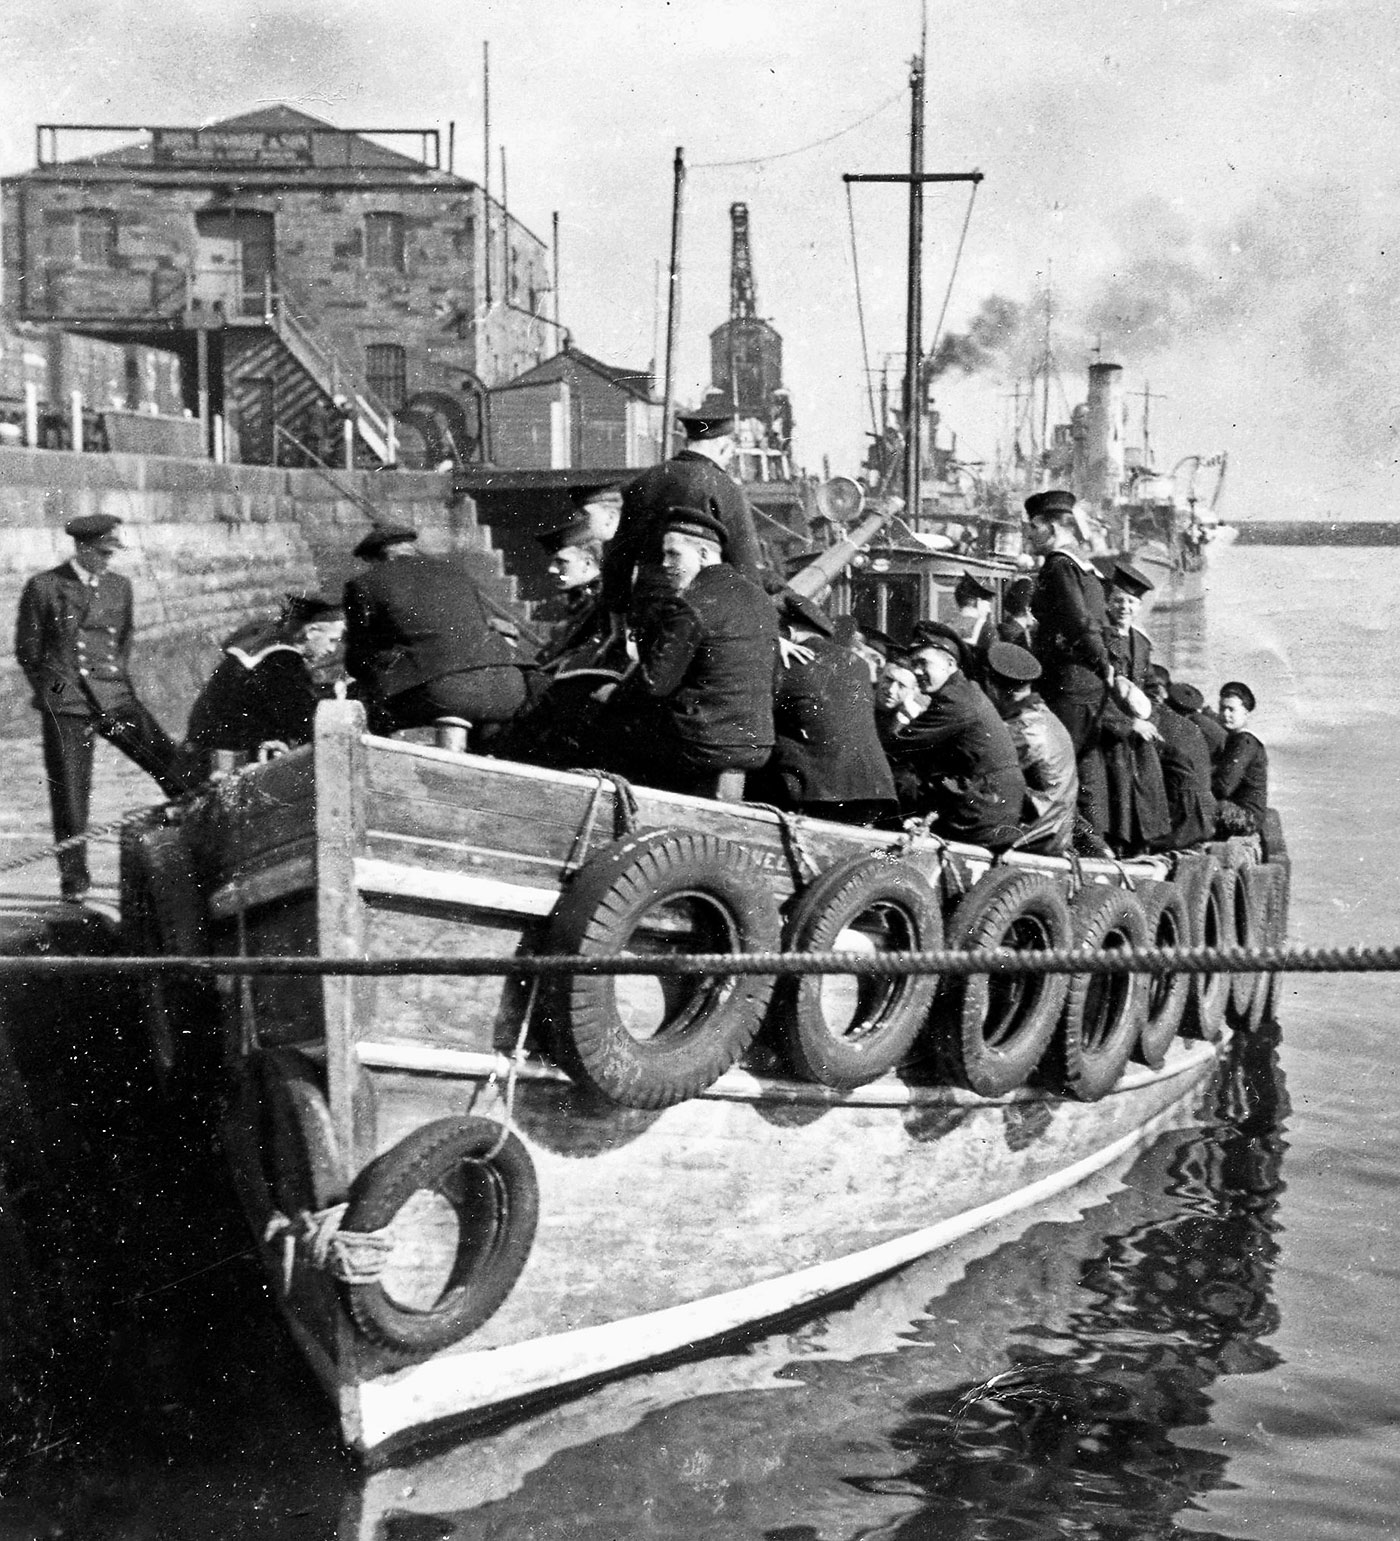 Duty Boat, 'The May Queen' at Granton Harbour at Wartime